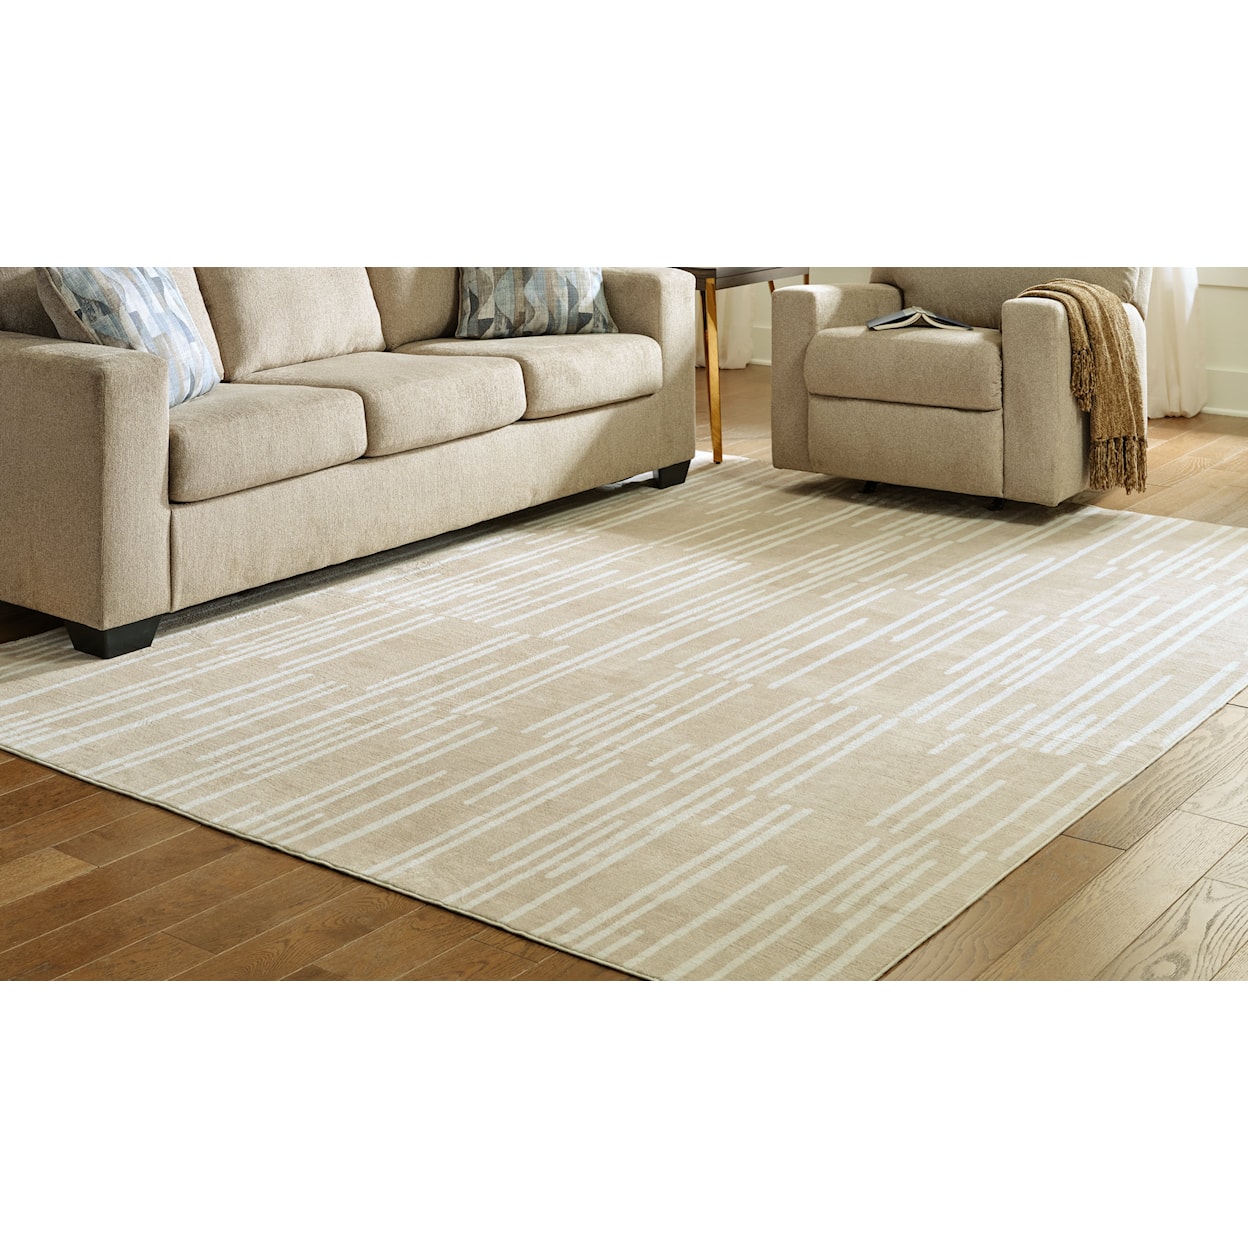 Signature Ardenville Large Rug